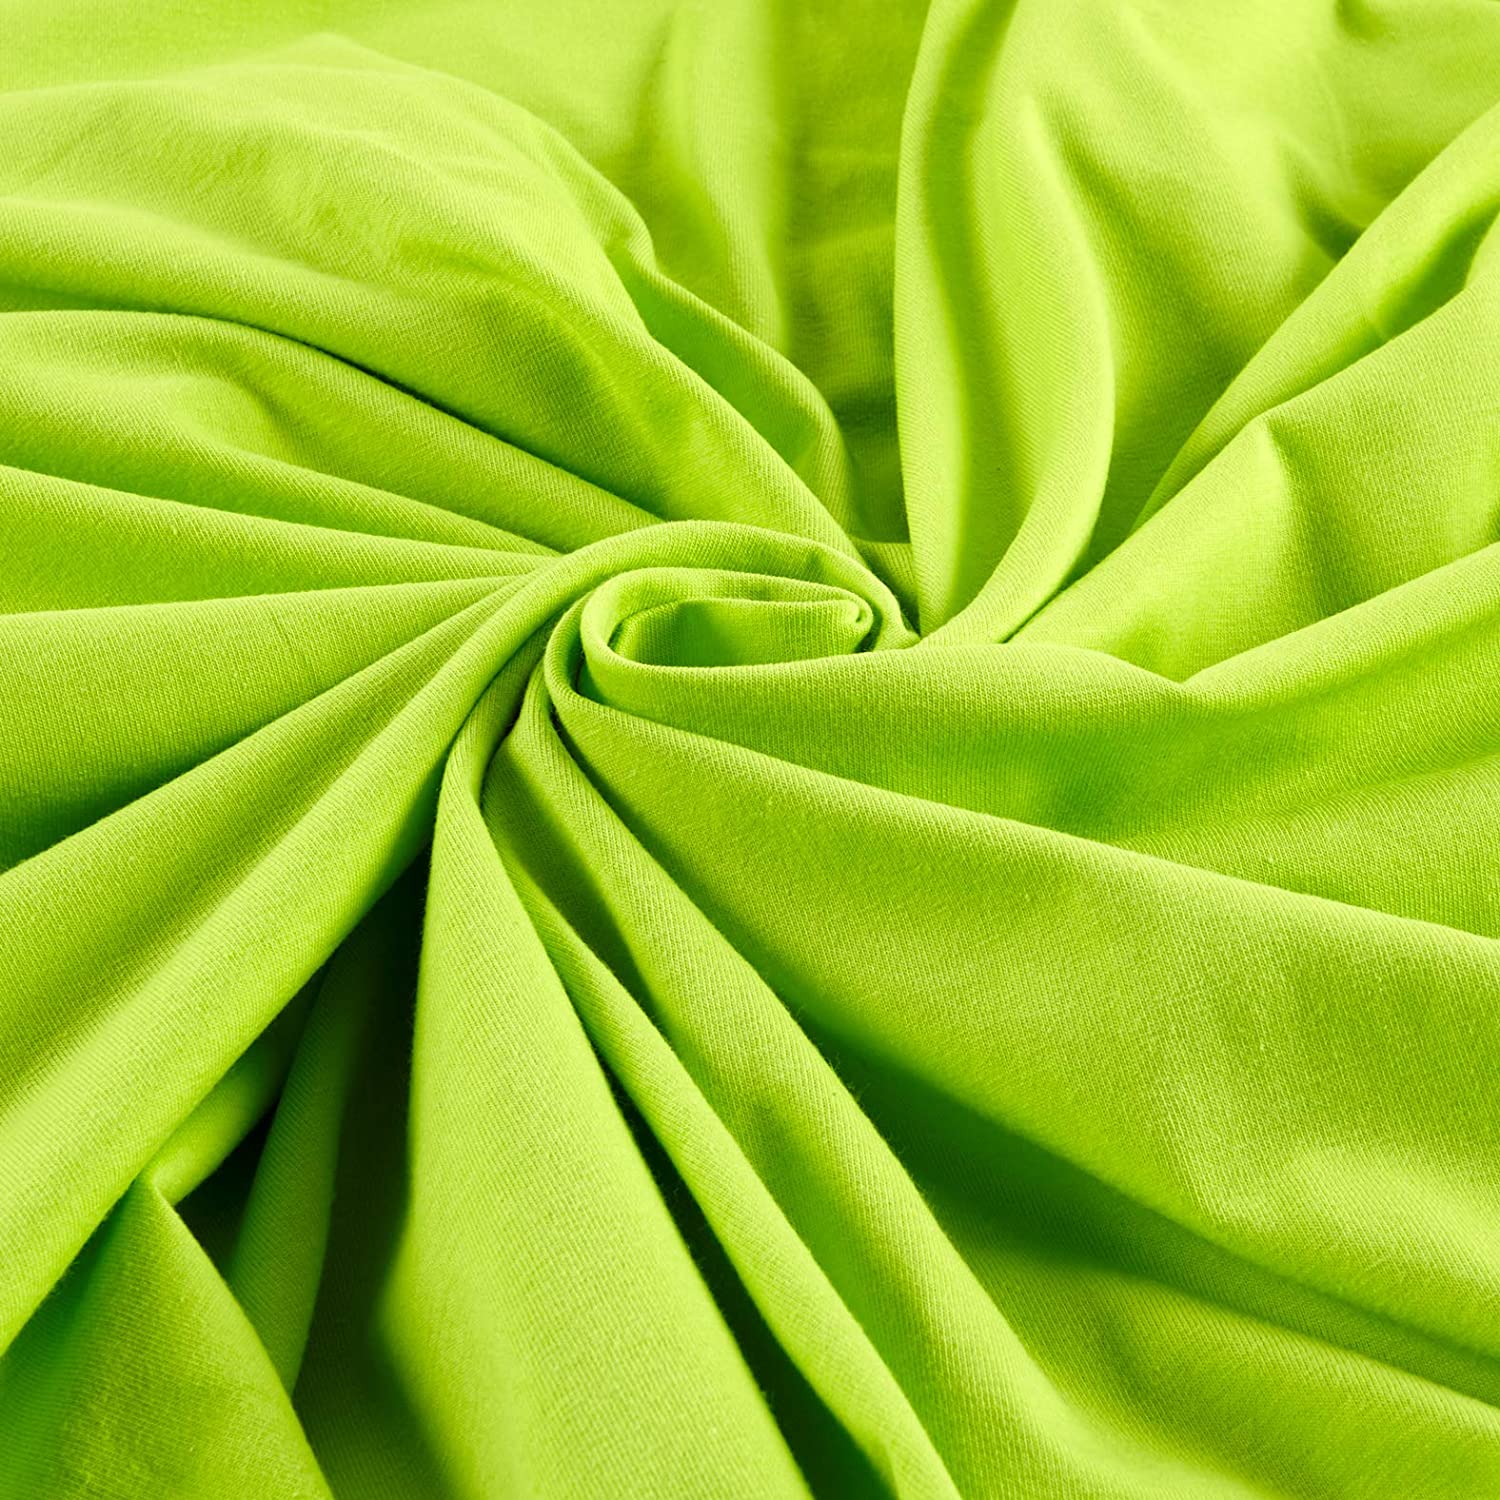 100% Polyester Wrinkle Free Stretch Double Knit Scuba Fabric 59/60" Wide Sold By The Yard.